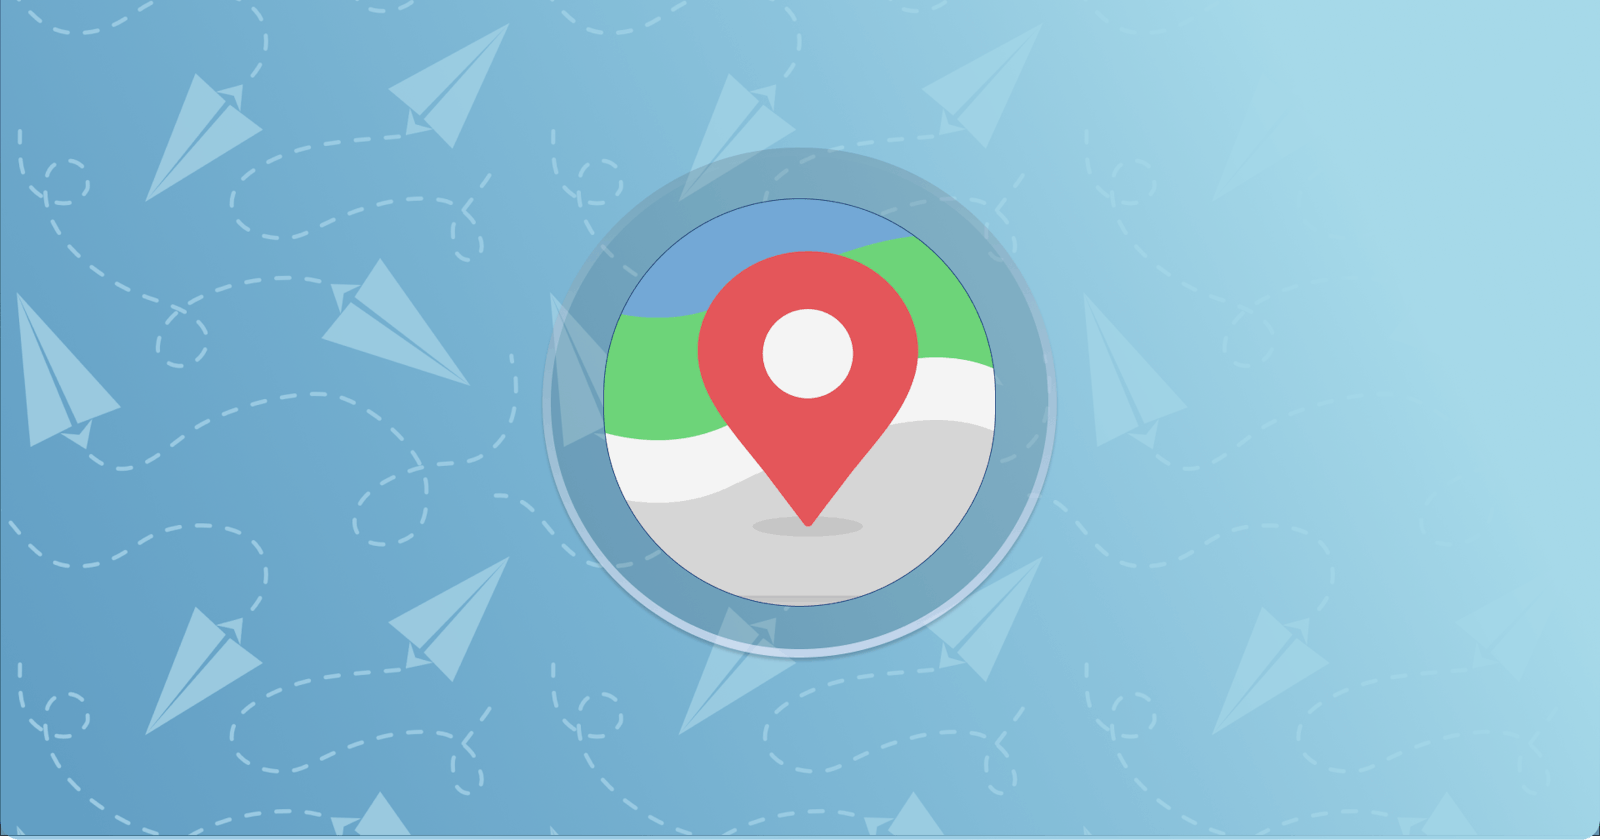 How to extract emails, social profiles, phone numbers and addresses from Google Maps